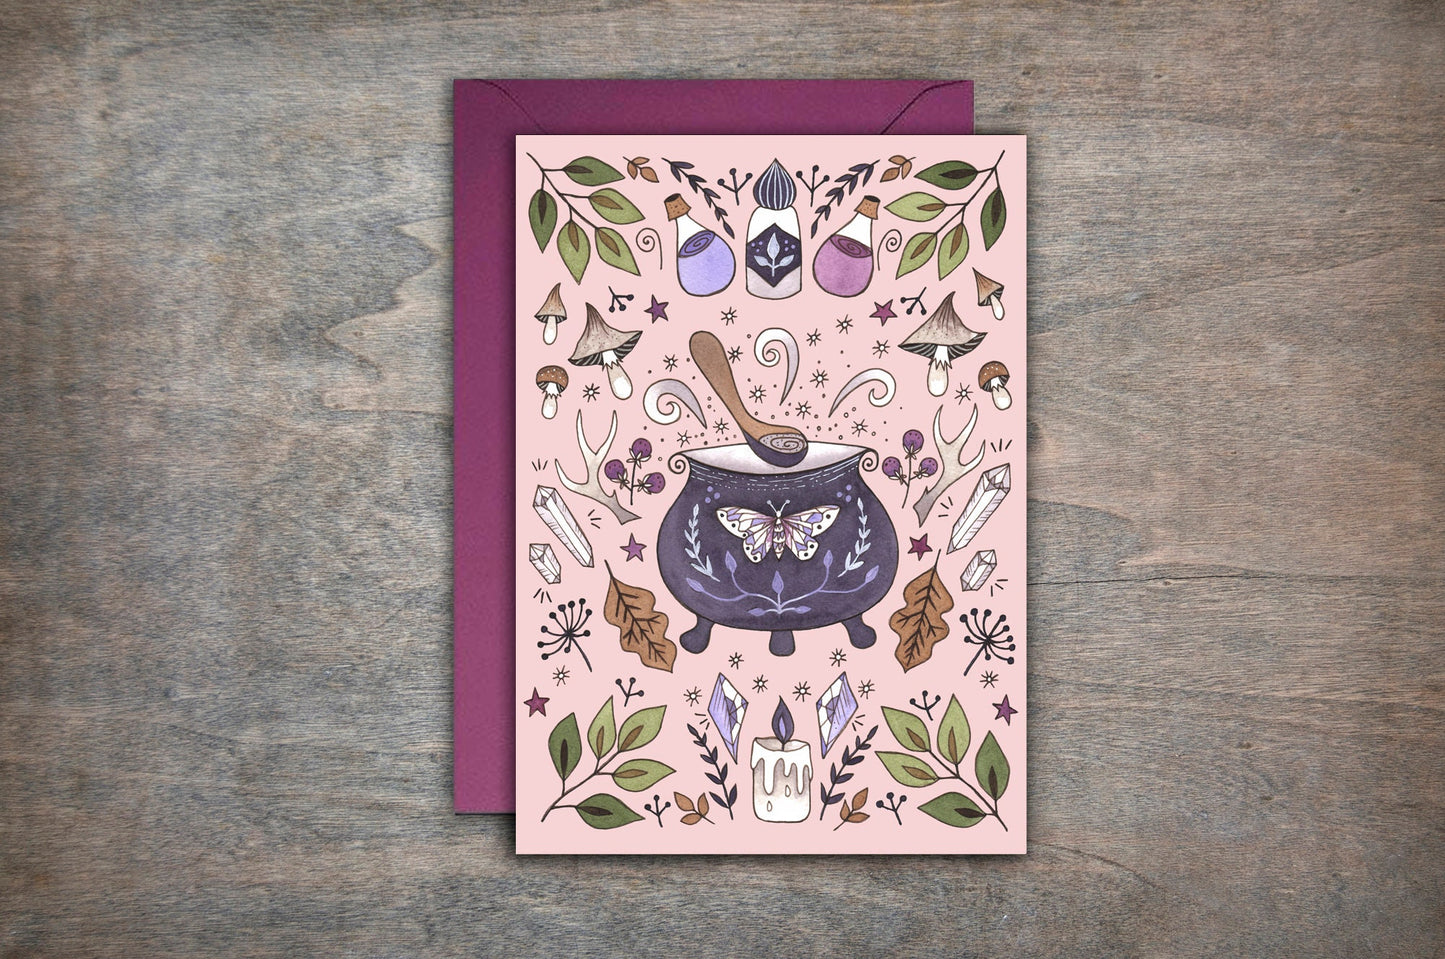 Kitchen Witch Greetings Card & Envelope - Cute Pink Witches Cauldron Card - Spring Botanical Ingredients Mushroom Toadstool Crystals Card